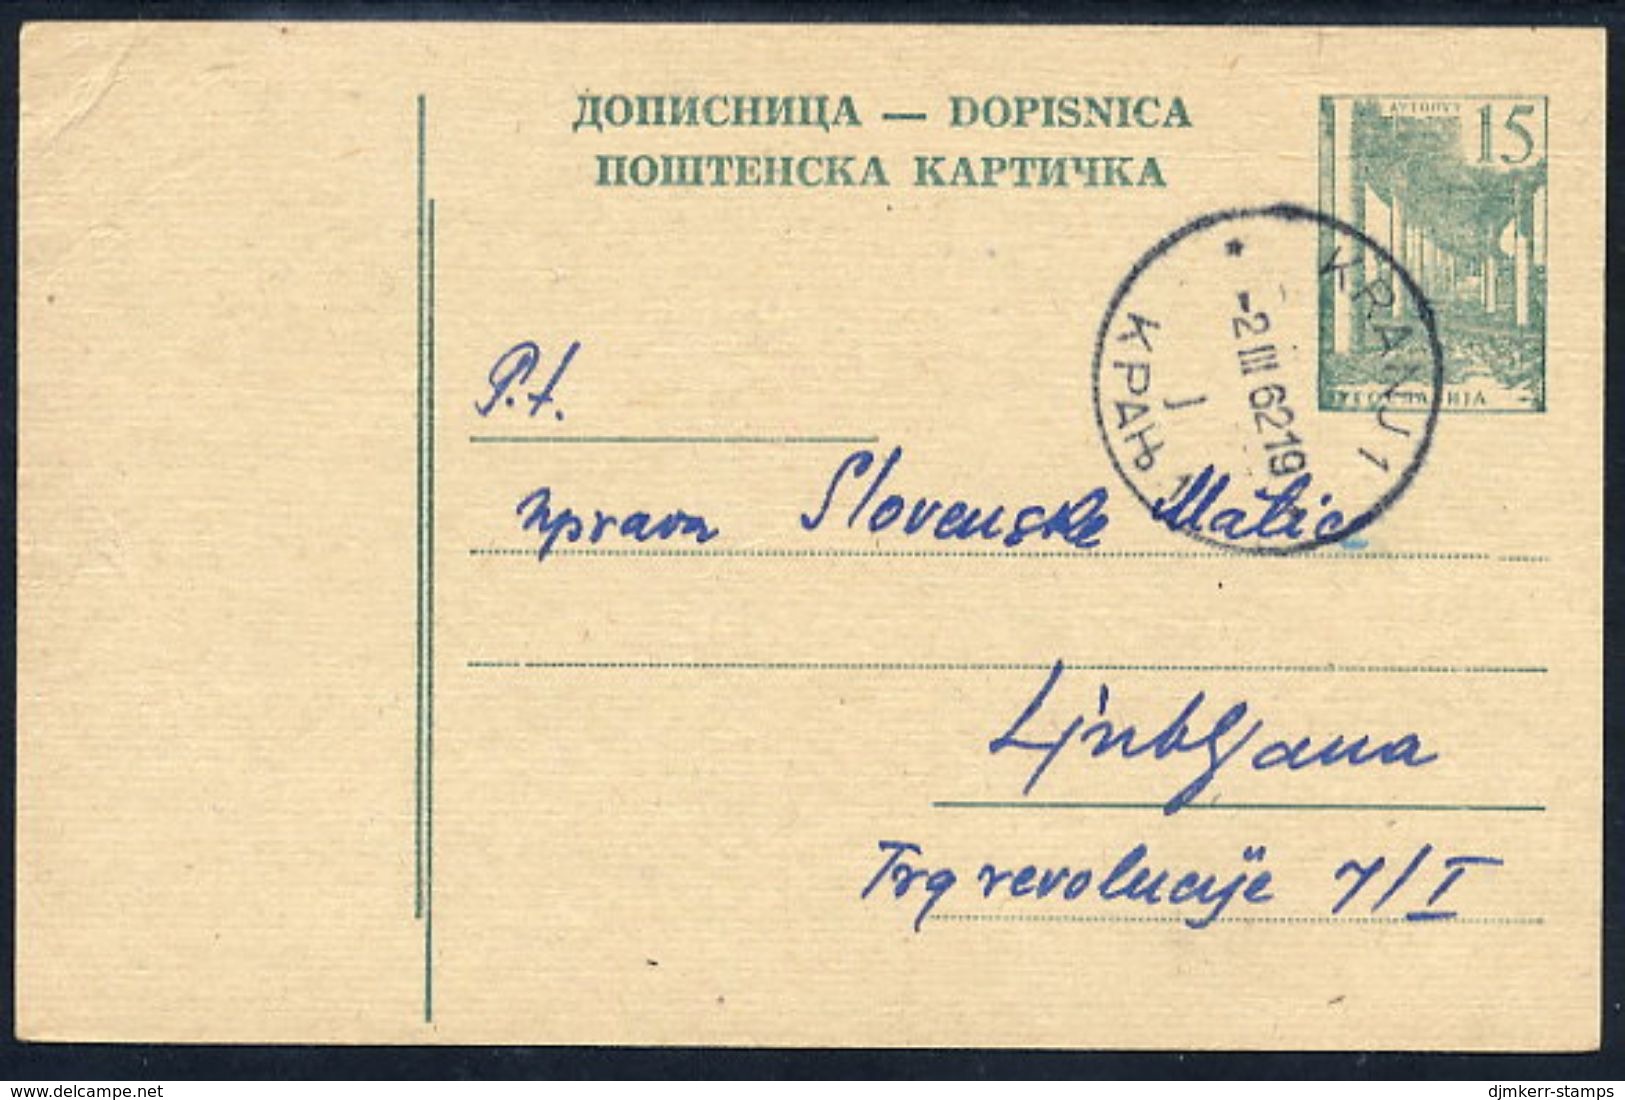 YUGOSLAVIA 1961 Construction Projects 15 D. Stationery Card Used.  Michel P160 - Postal Stationery